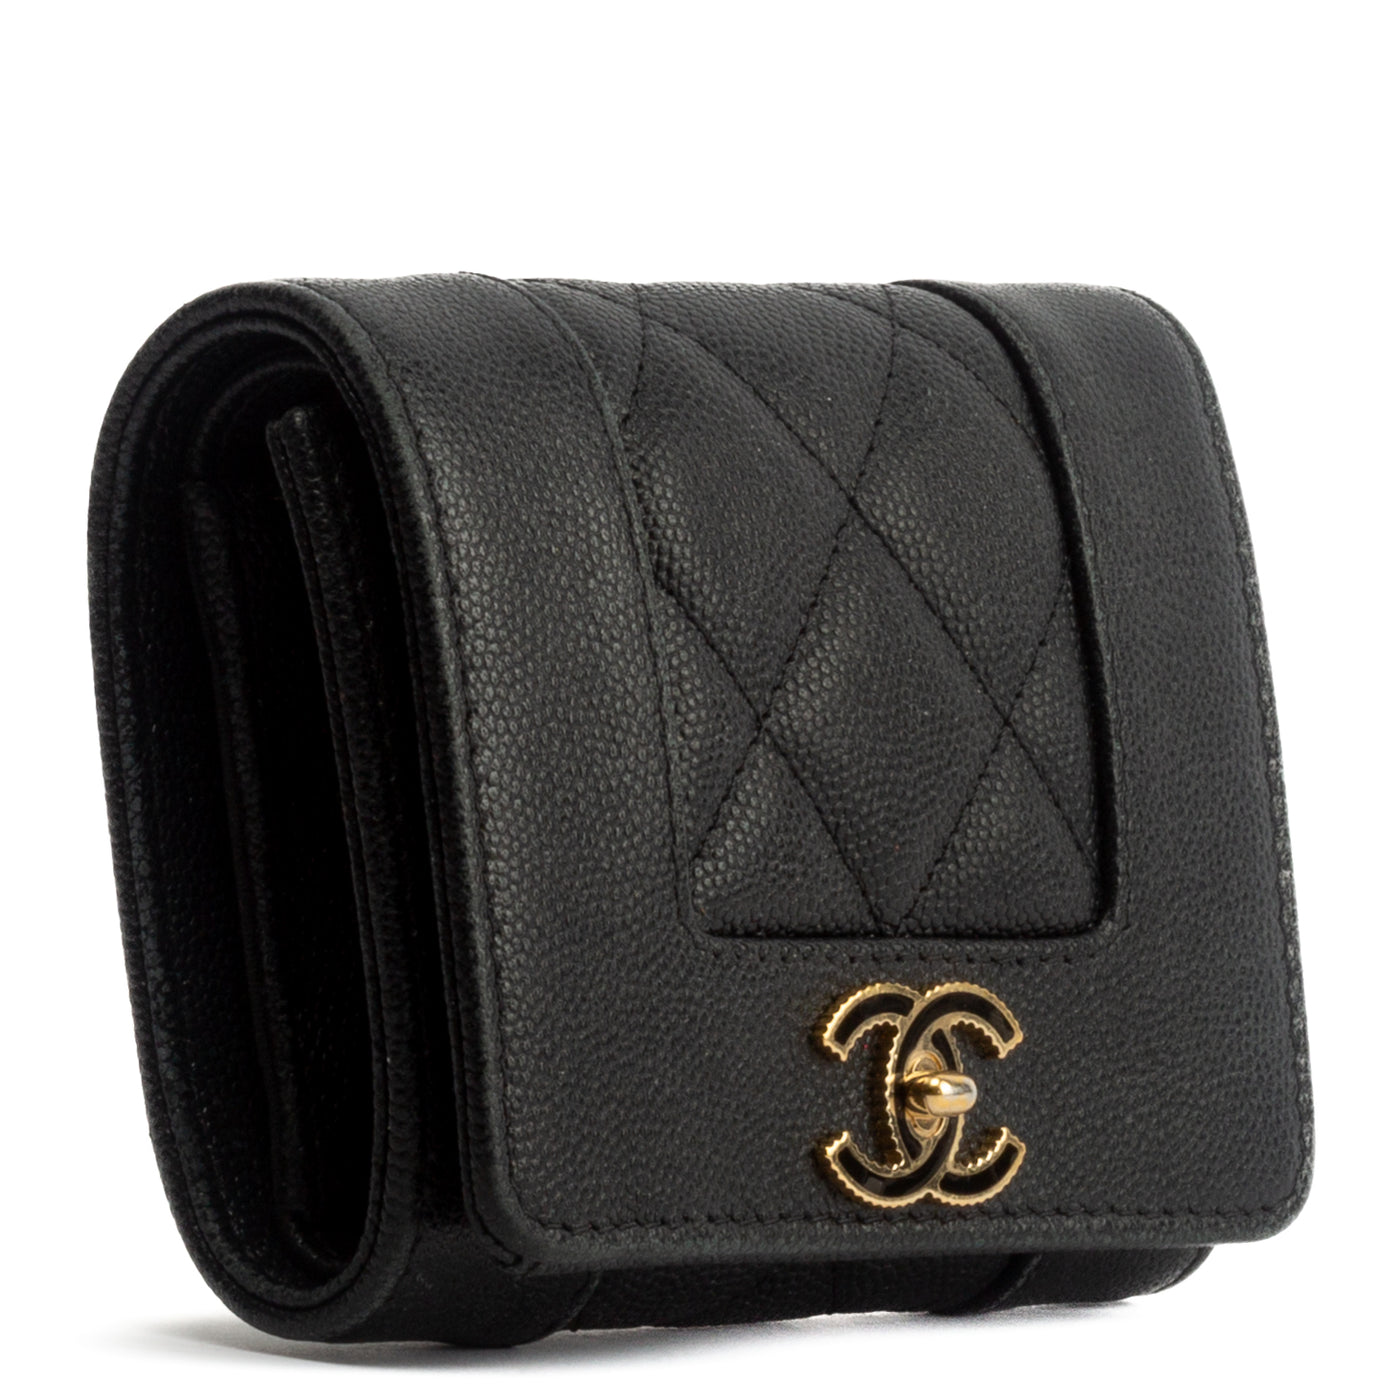 CHANEL Mademoiselle Compact Wallet - Black